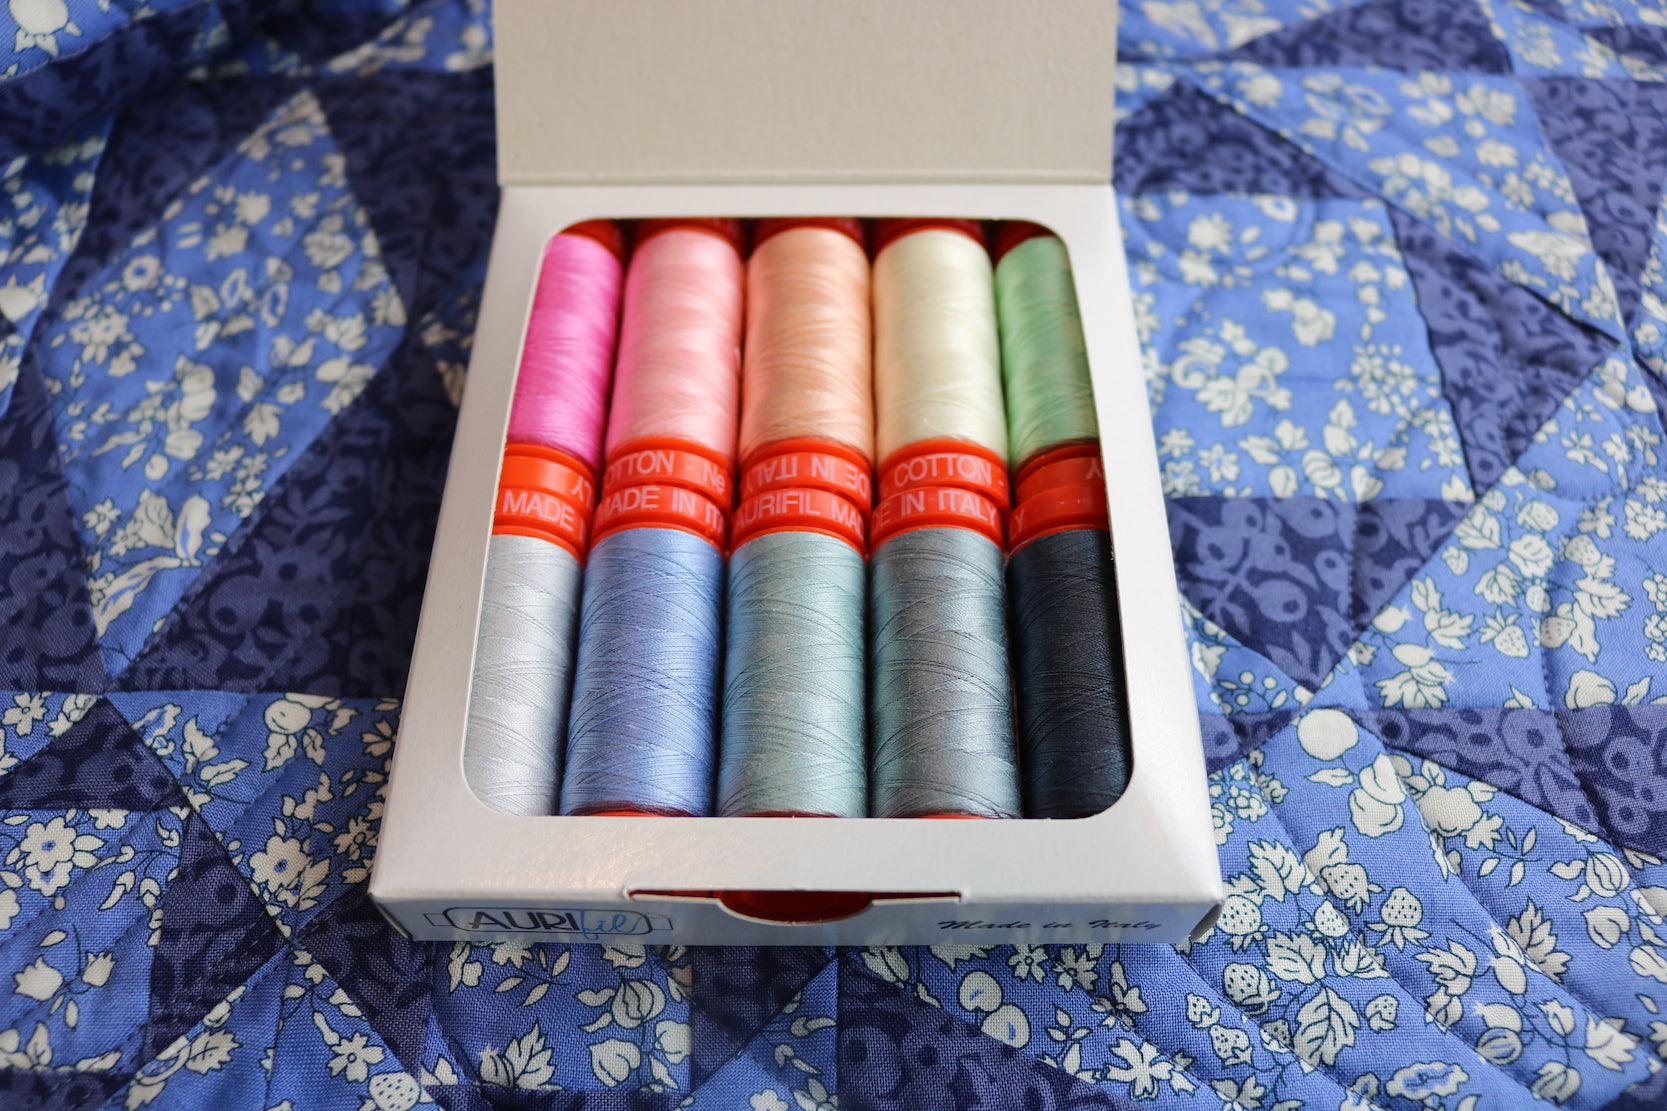 Quilting with Liberty Fabrics Aurifil Thread Collection